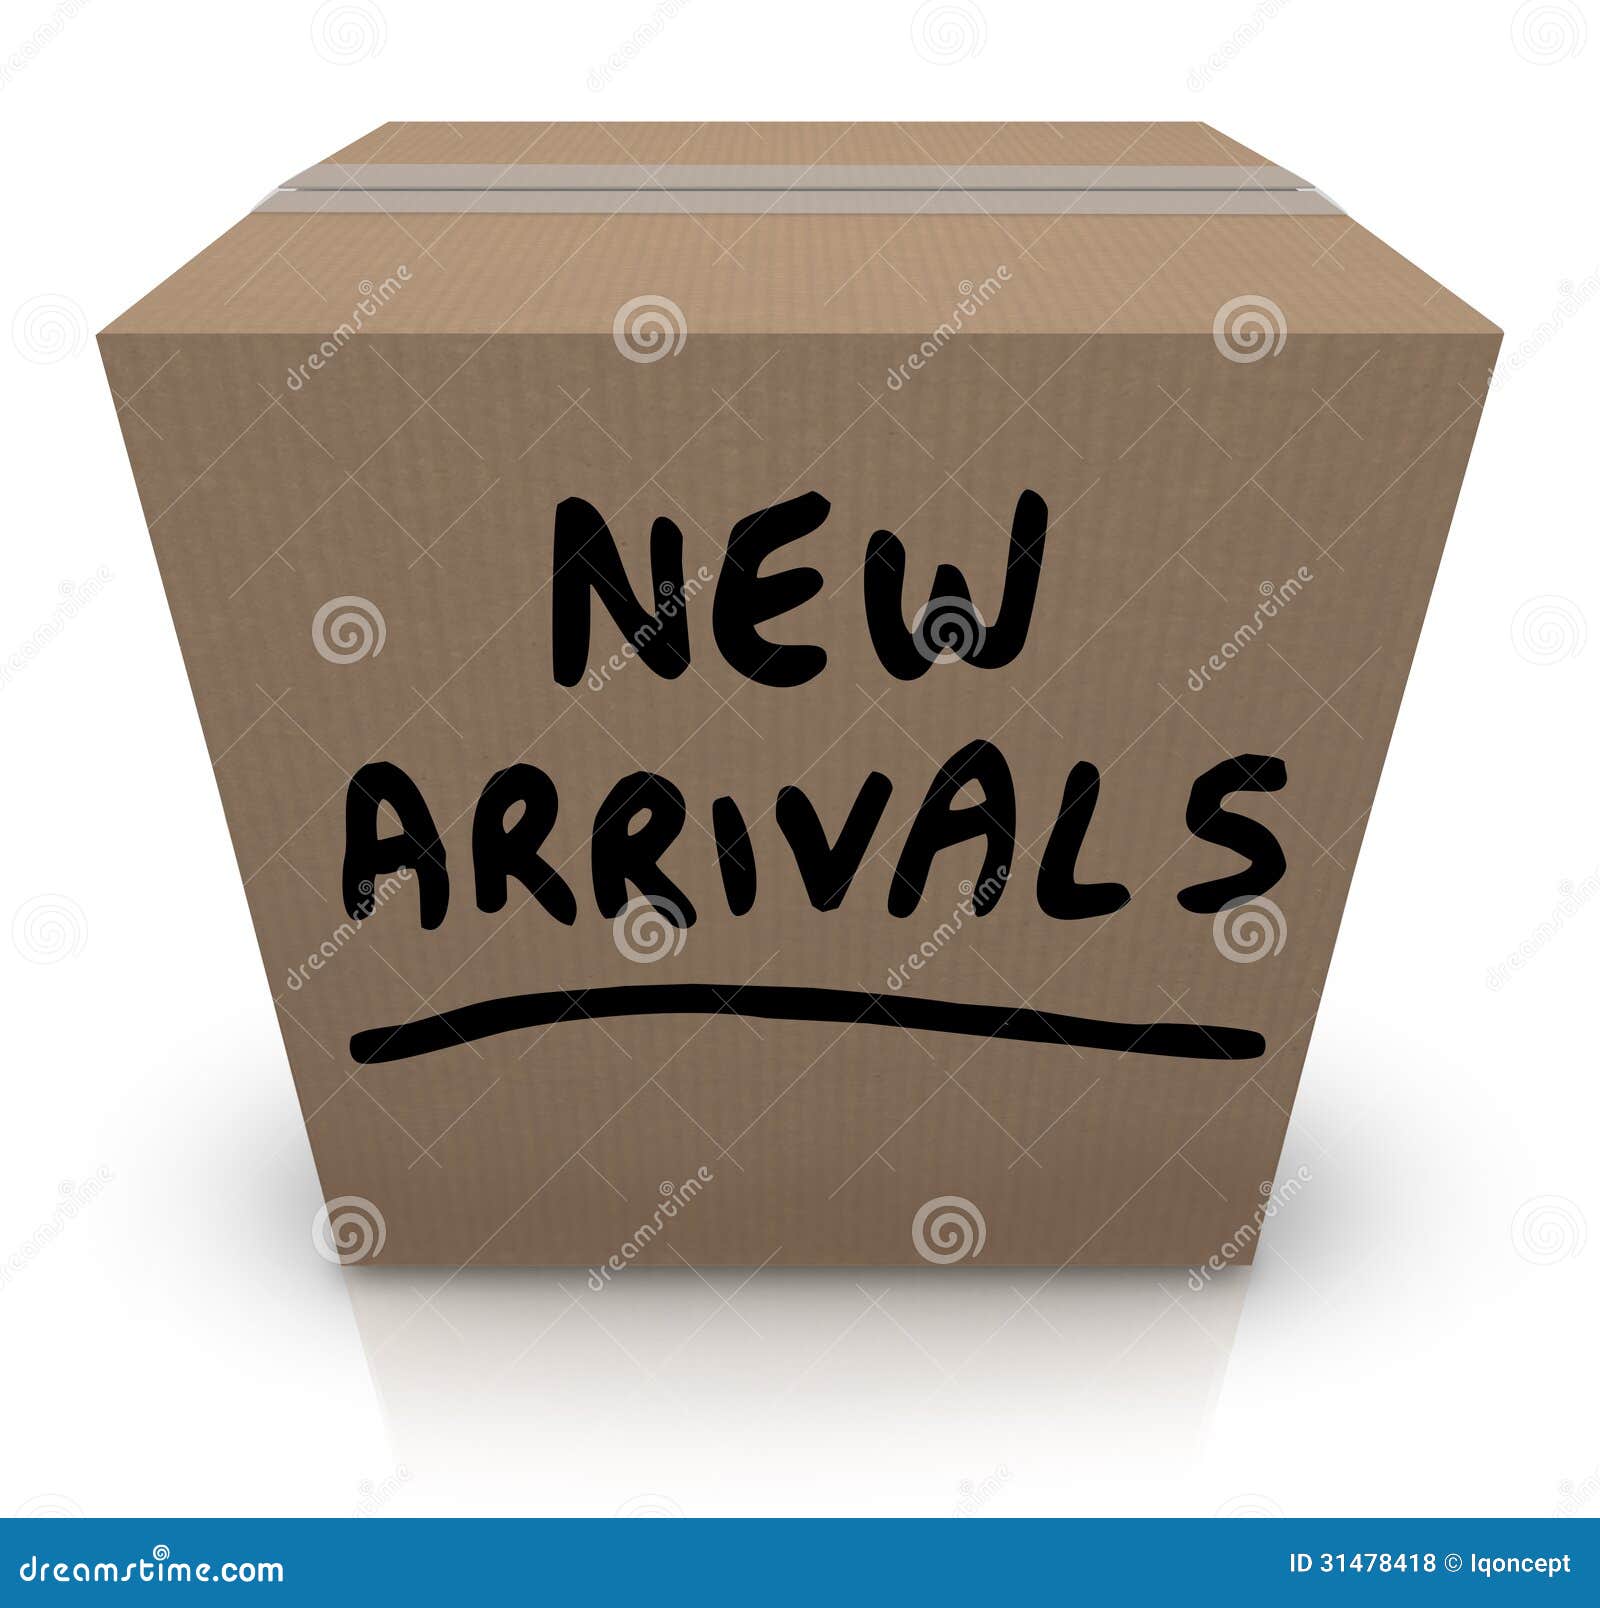 new arrivals cardboard box latest products merchandise